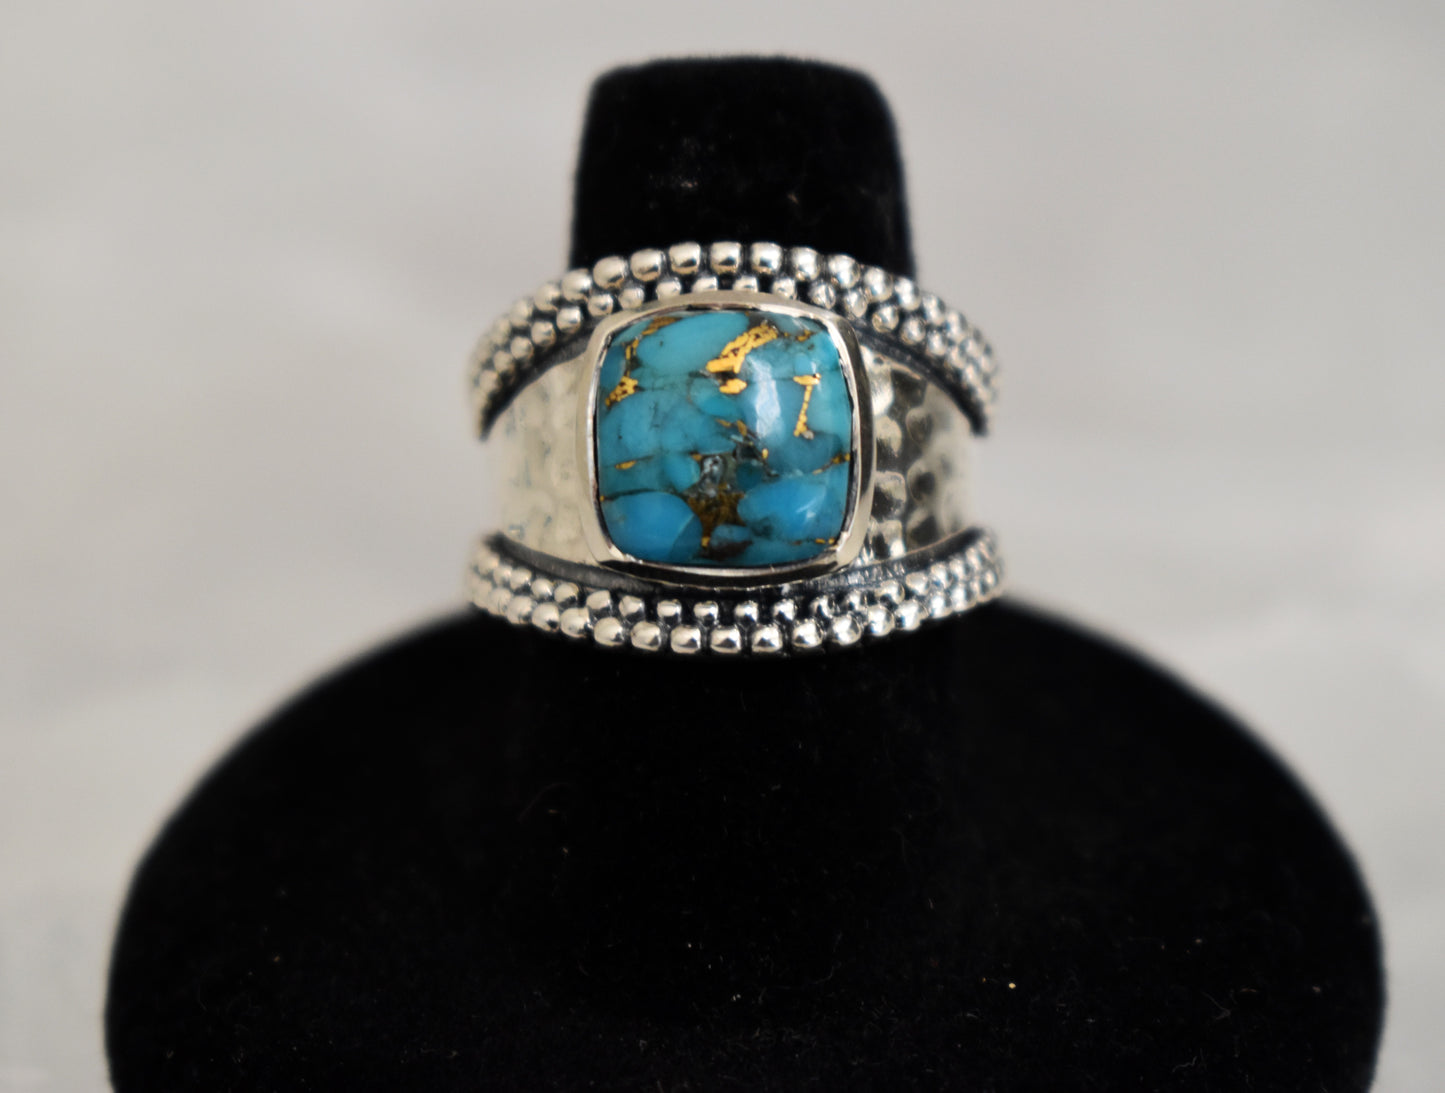 stones-of-transformation - Blue Copper Turquoise Ring (Size 7) - Stones of Transformation - 